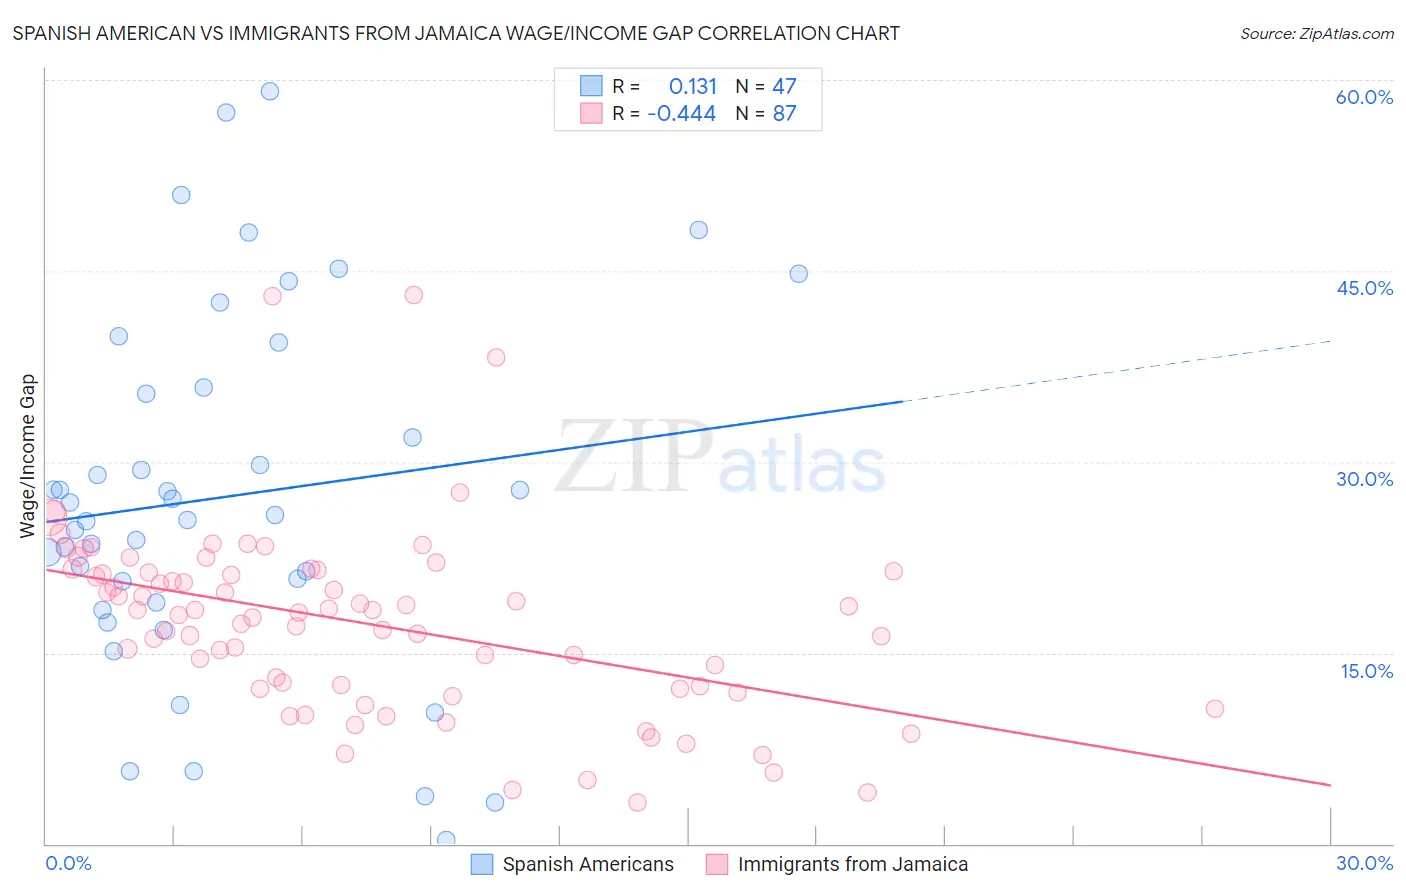 Spanish American vs Immigrants from Jamaica Wage/Income Gap